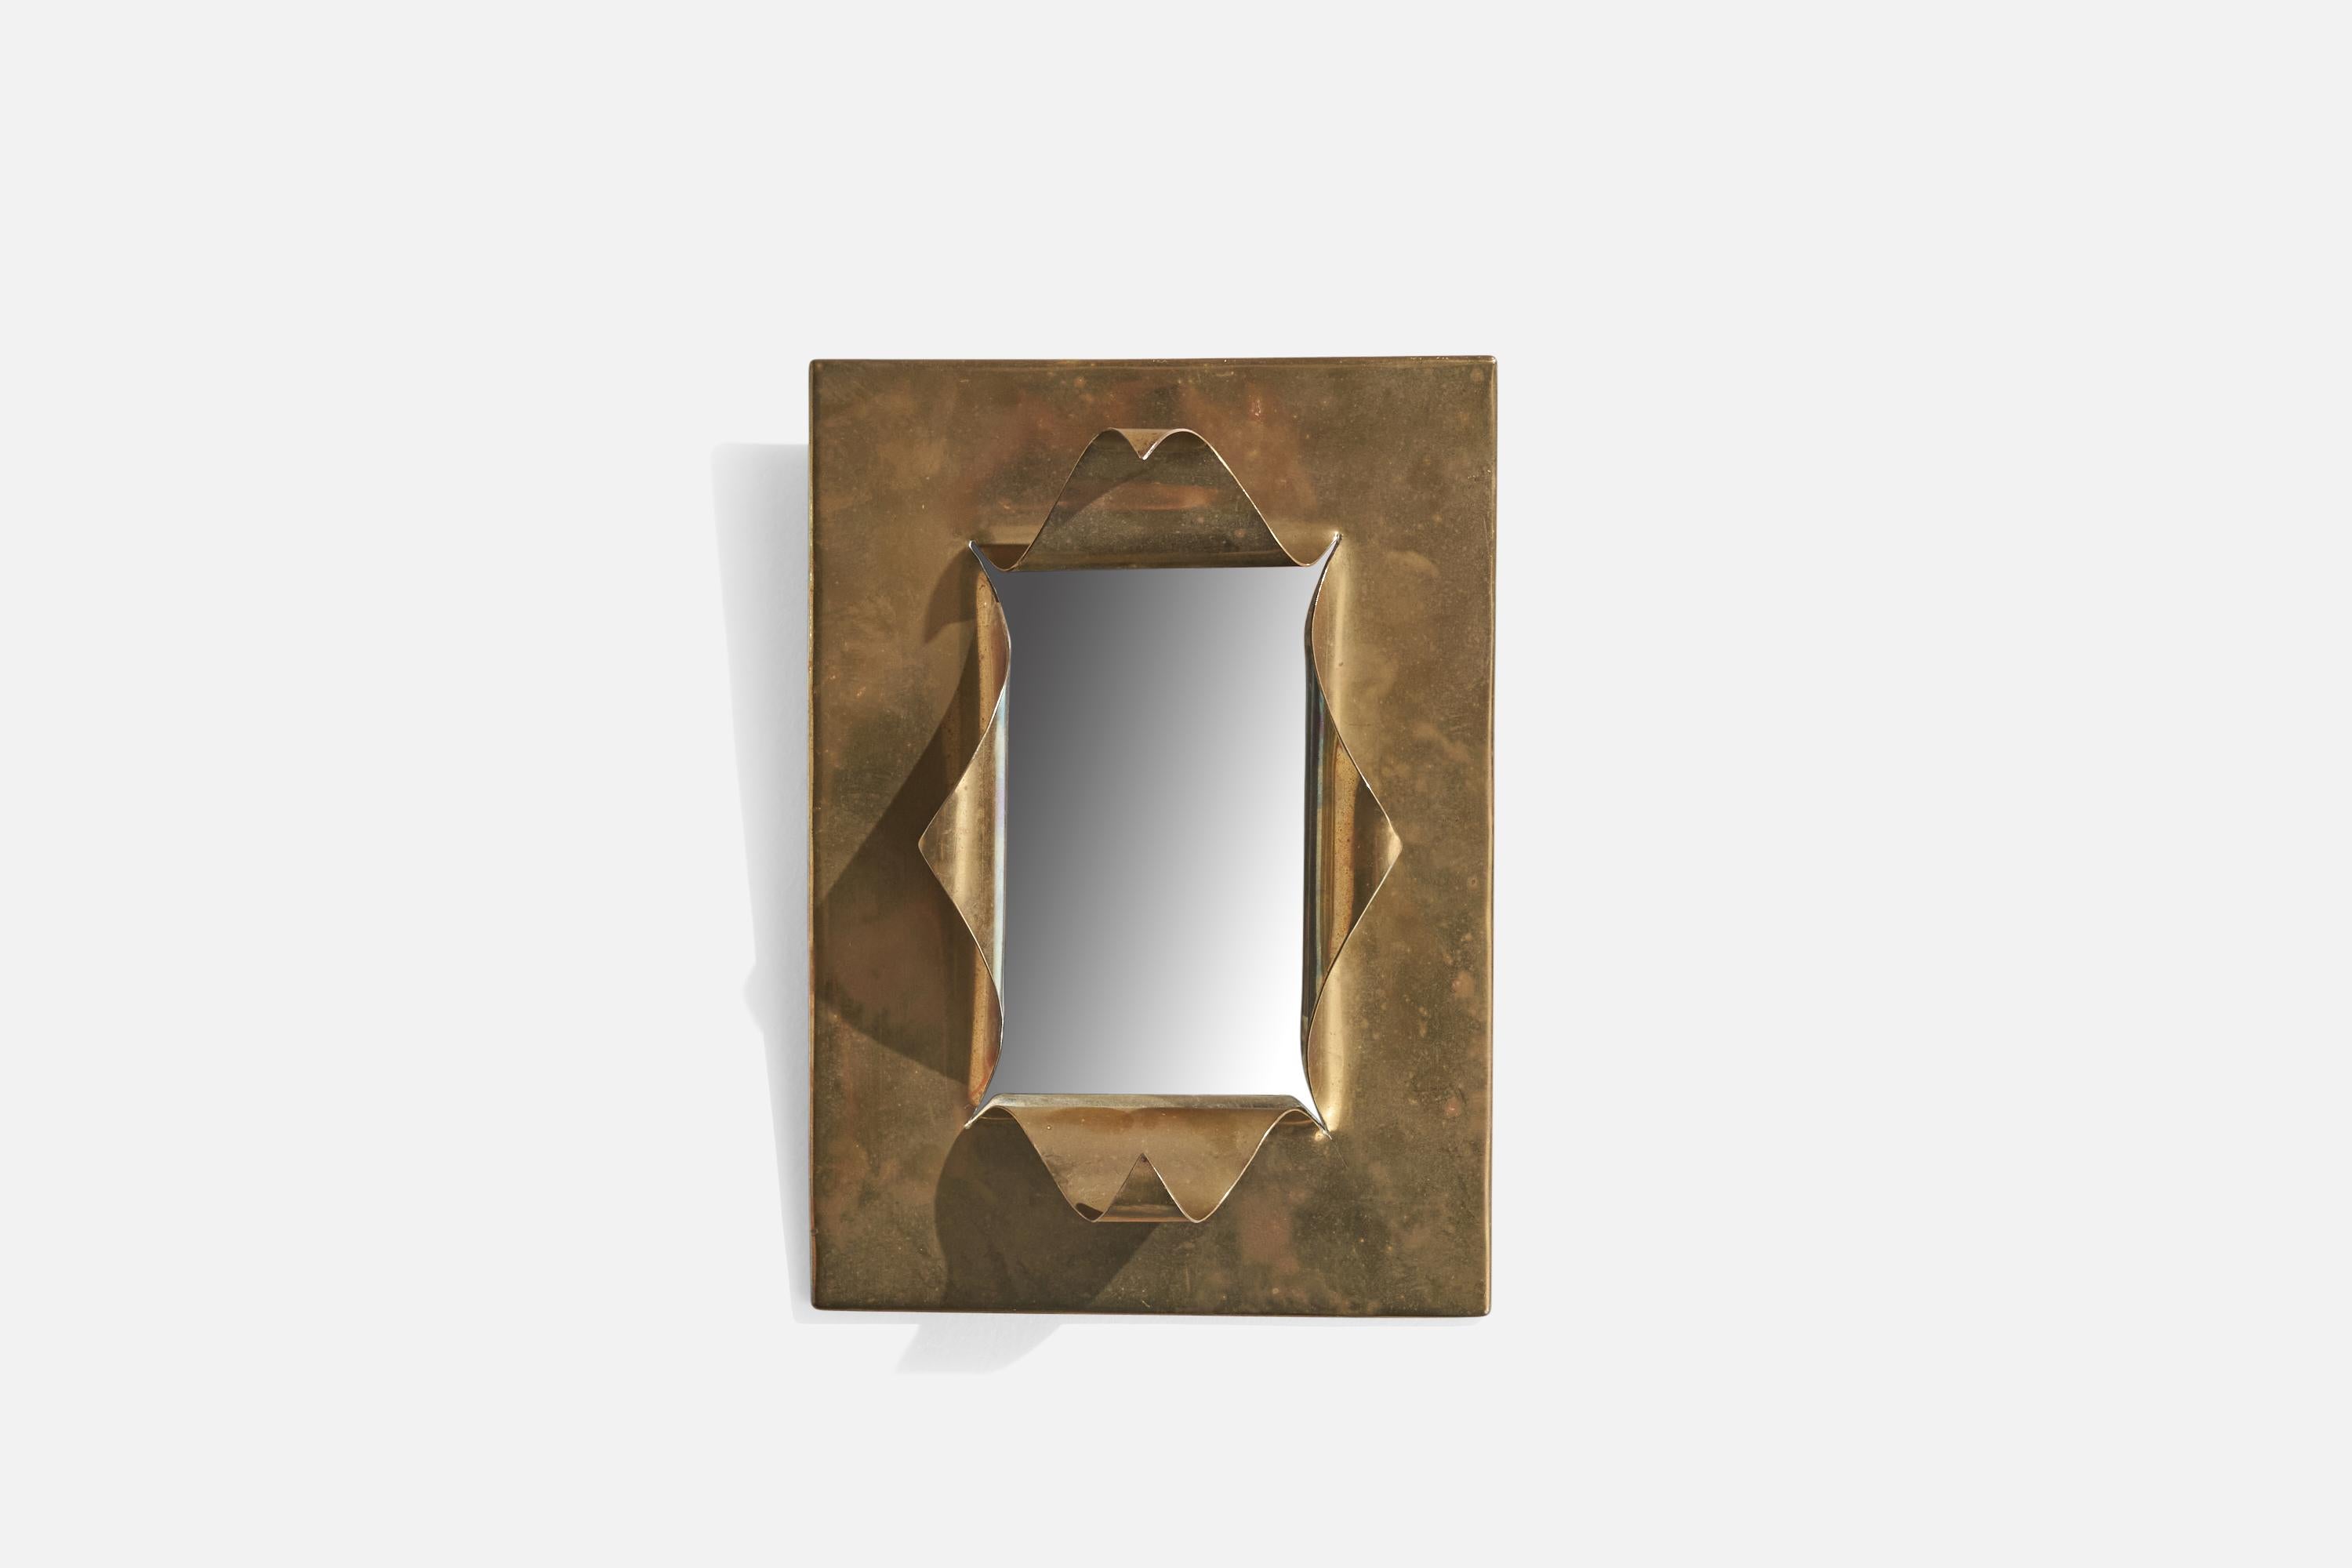 A sculptural brass mirror designed and produced in Italy, 1930s.